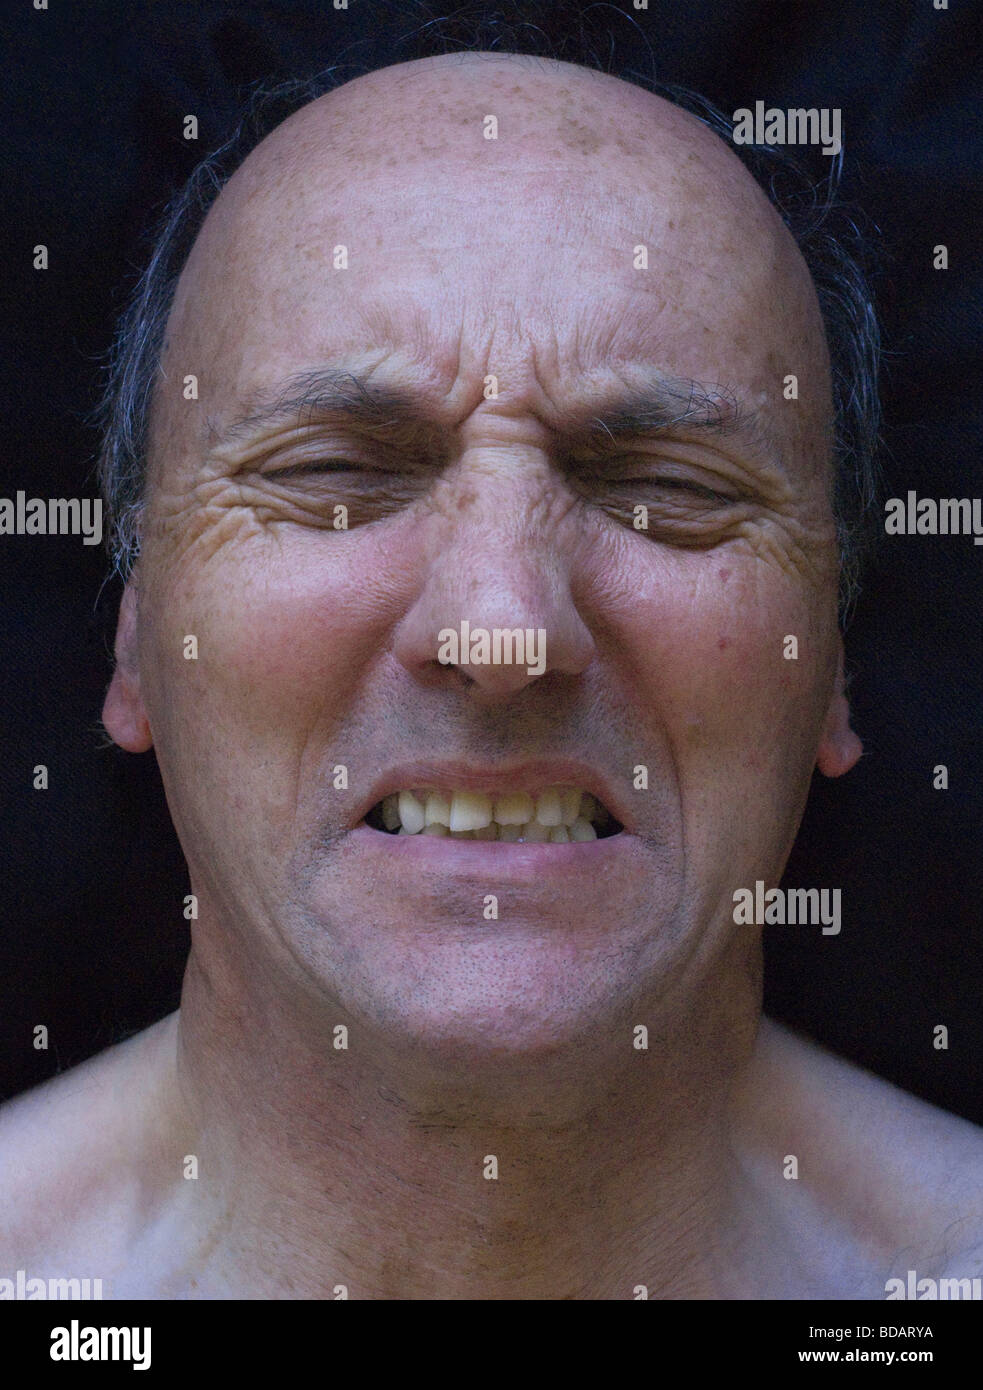 A middle-aged man showing stress, tension and depression Stock Photo